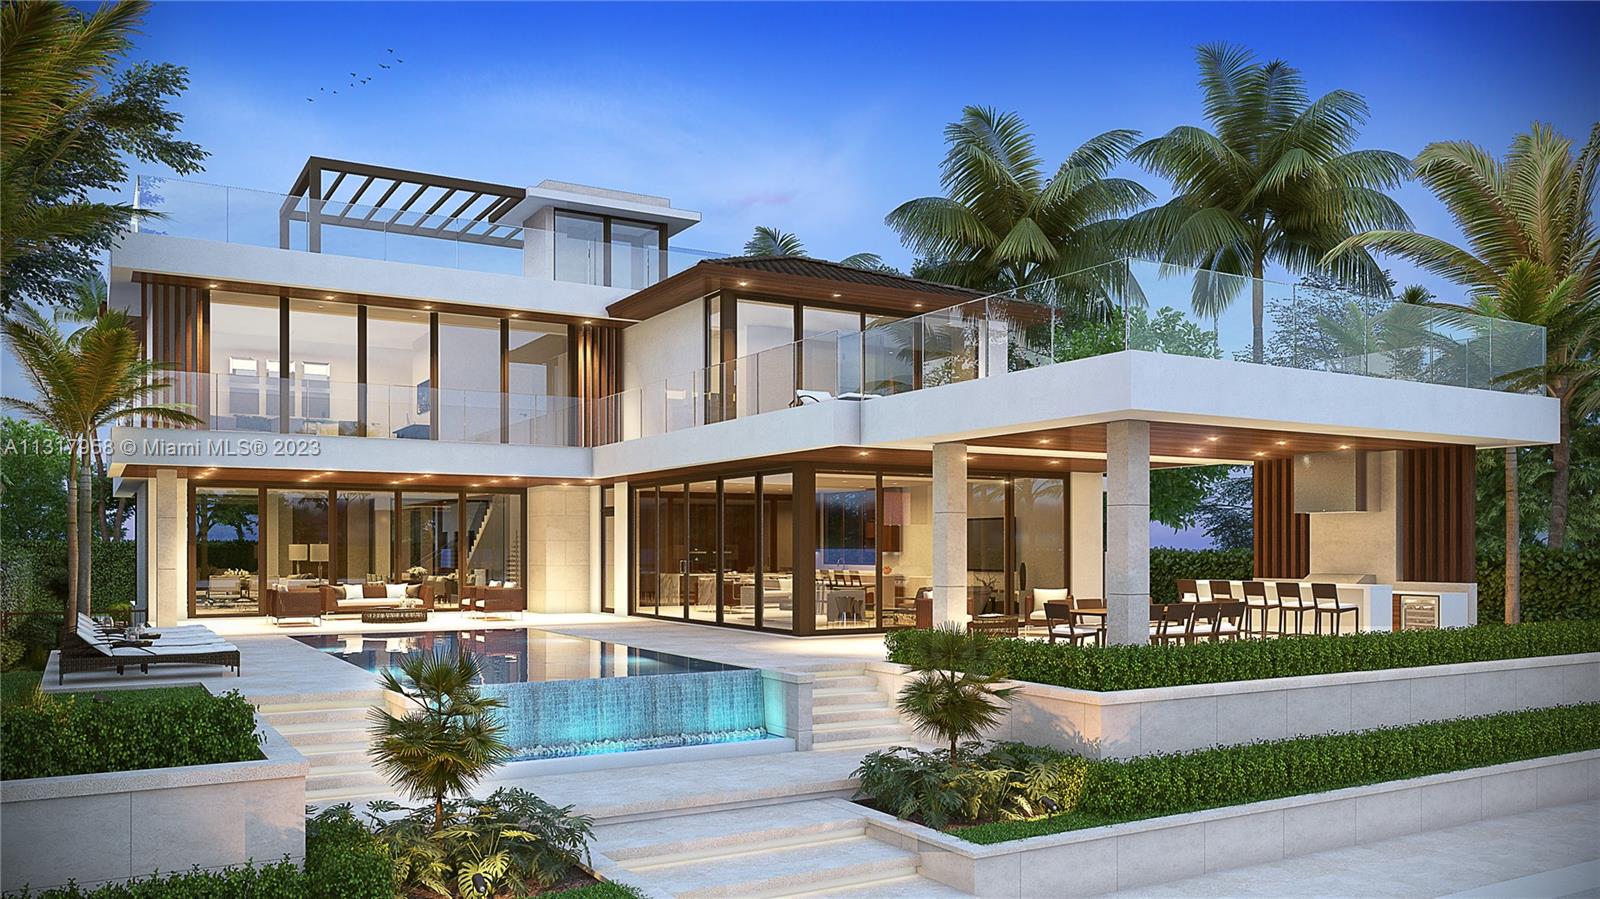 Rare open bay tropical modern architectural masterpiece expected to be delivered in Q4 2024 and ready for new owner to provide furnishing touches. Featuring 75 feet of waterfront on a 11,250 sq. ft. lot, with 5,200+ sq. ft indoor space. 2 story residence with 5 bedrooms & 5.5 bathrooms. The home boasts an expansive living room and family room that both overlook the scenic bay view. It also features a boat dock, private pool, roof deck, elevator, outdoor kitchen, 2 car garage, gazebo & more! Located on the exclusive, highly coveted and gated Biscayne Point, this location has become one of the most desirable waterfront luxury living spots in Miami Beach. Centrally located, and minutes away from Bal Harbour, Miami Design District, Wynwood Art District, South Beach and major private schools.